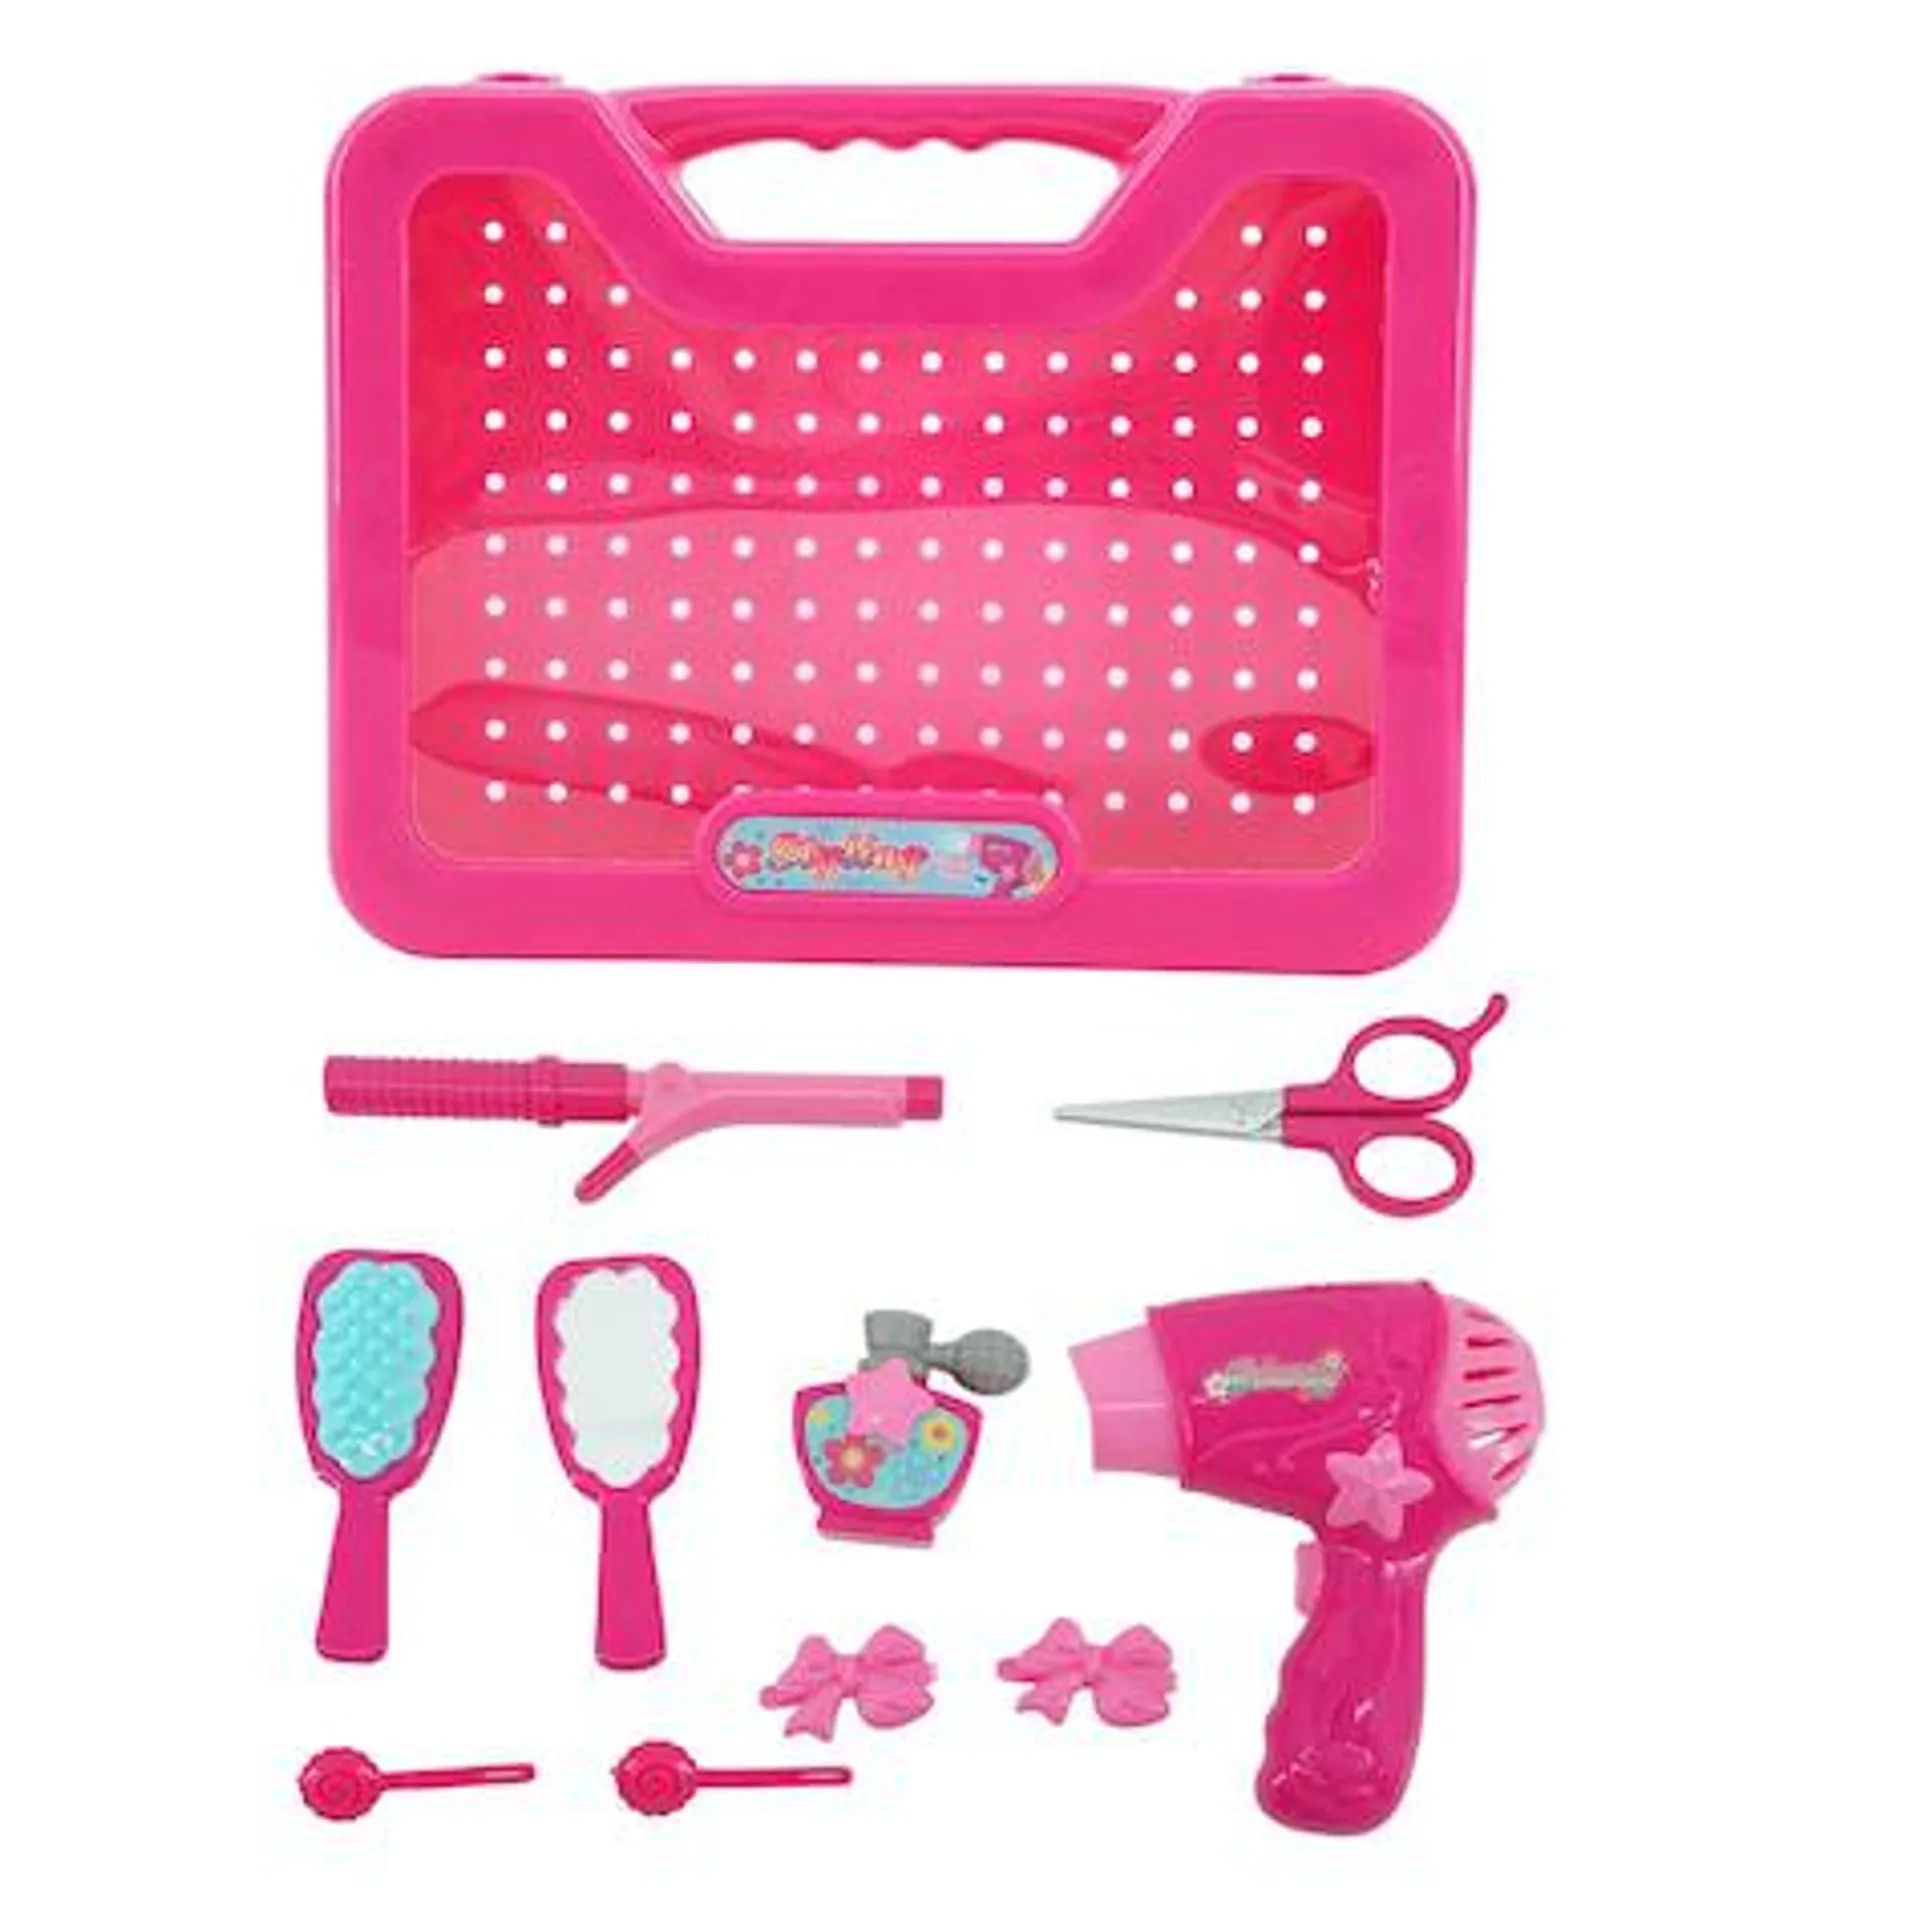 Beauty Styling Playset with Sounds, 11-pc.